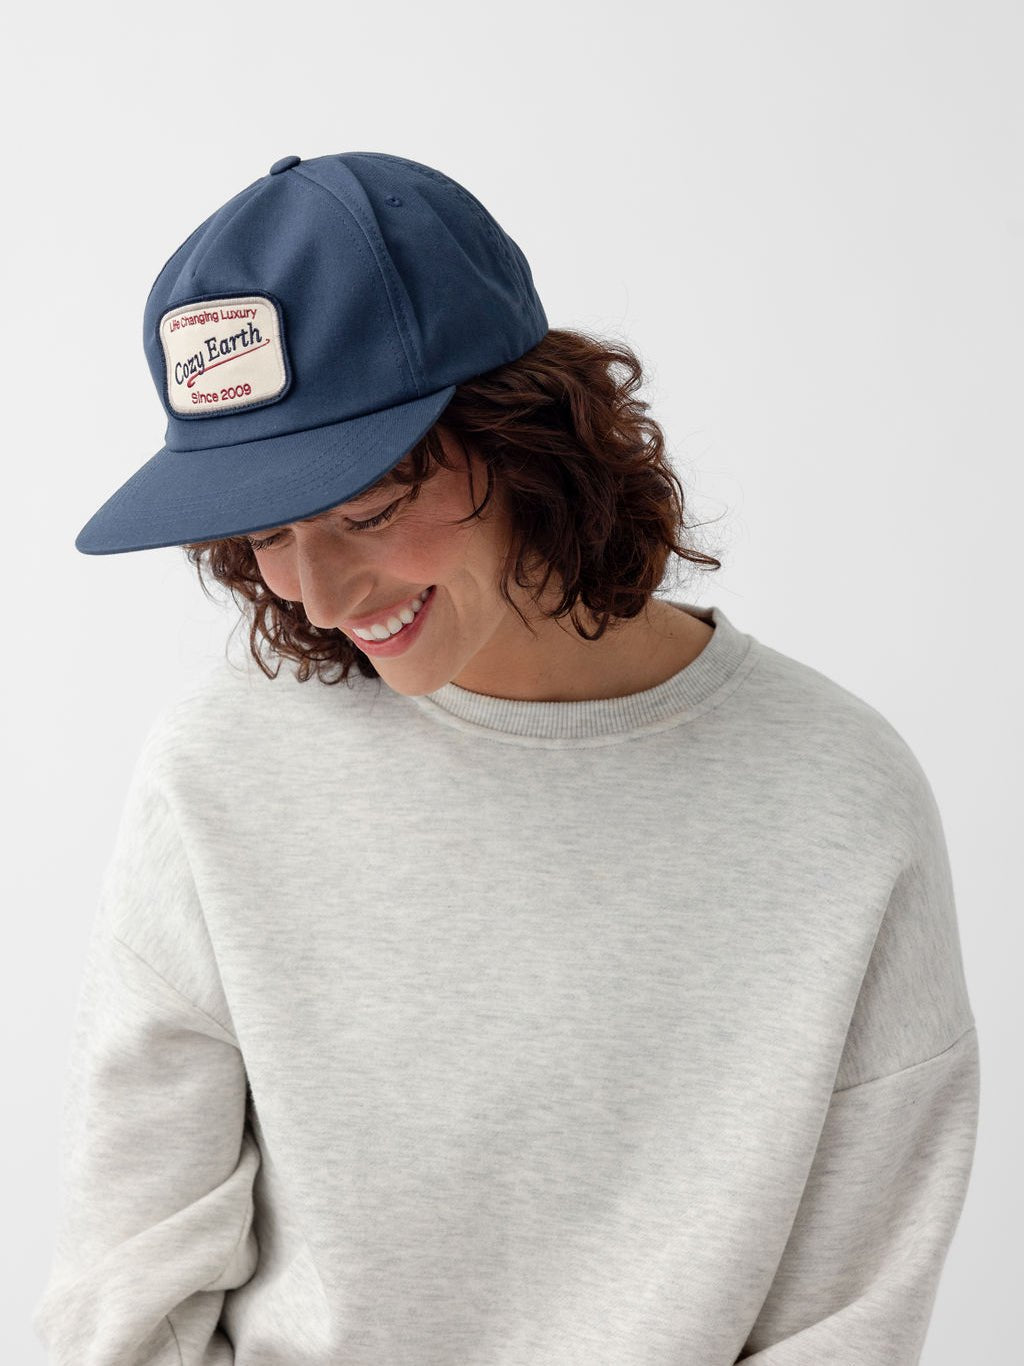 Woman smiling and looking down wearing navy heritage snapback 